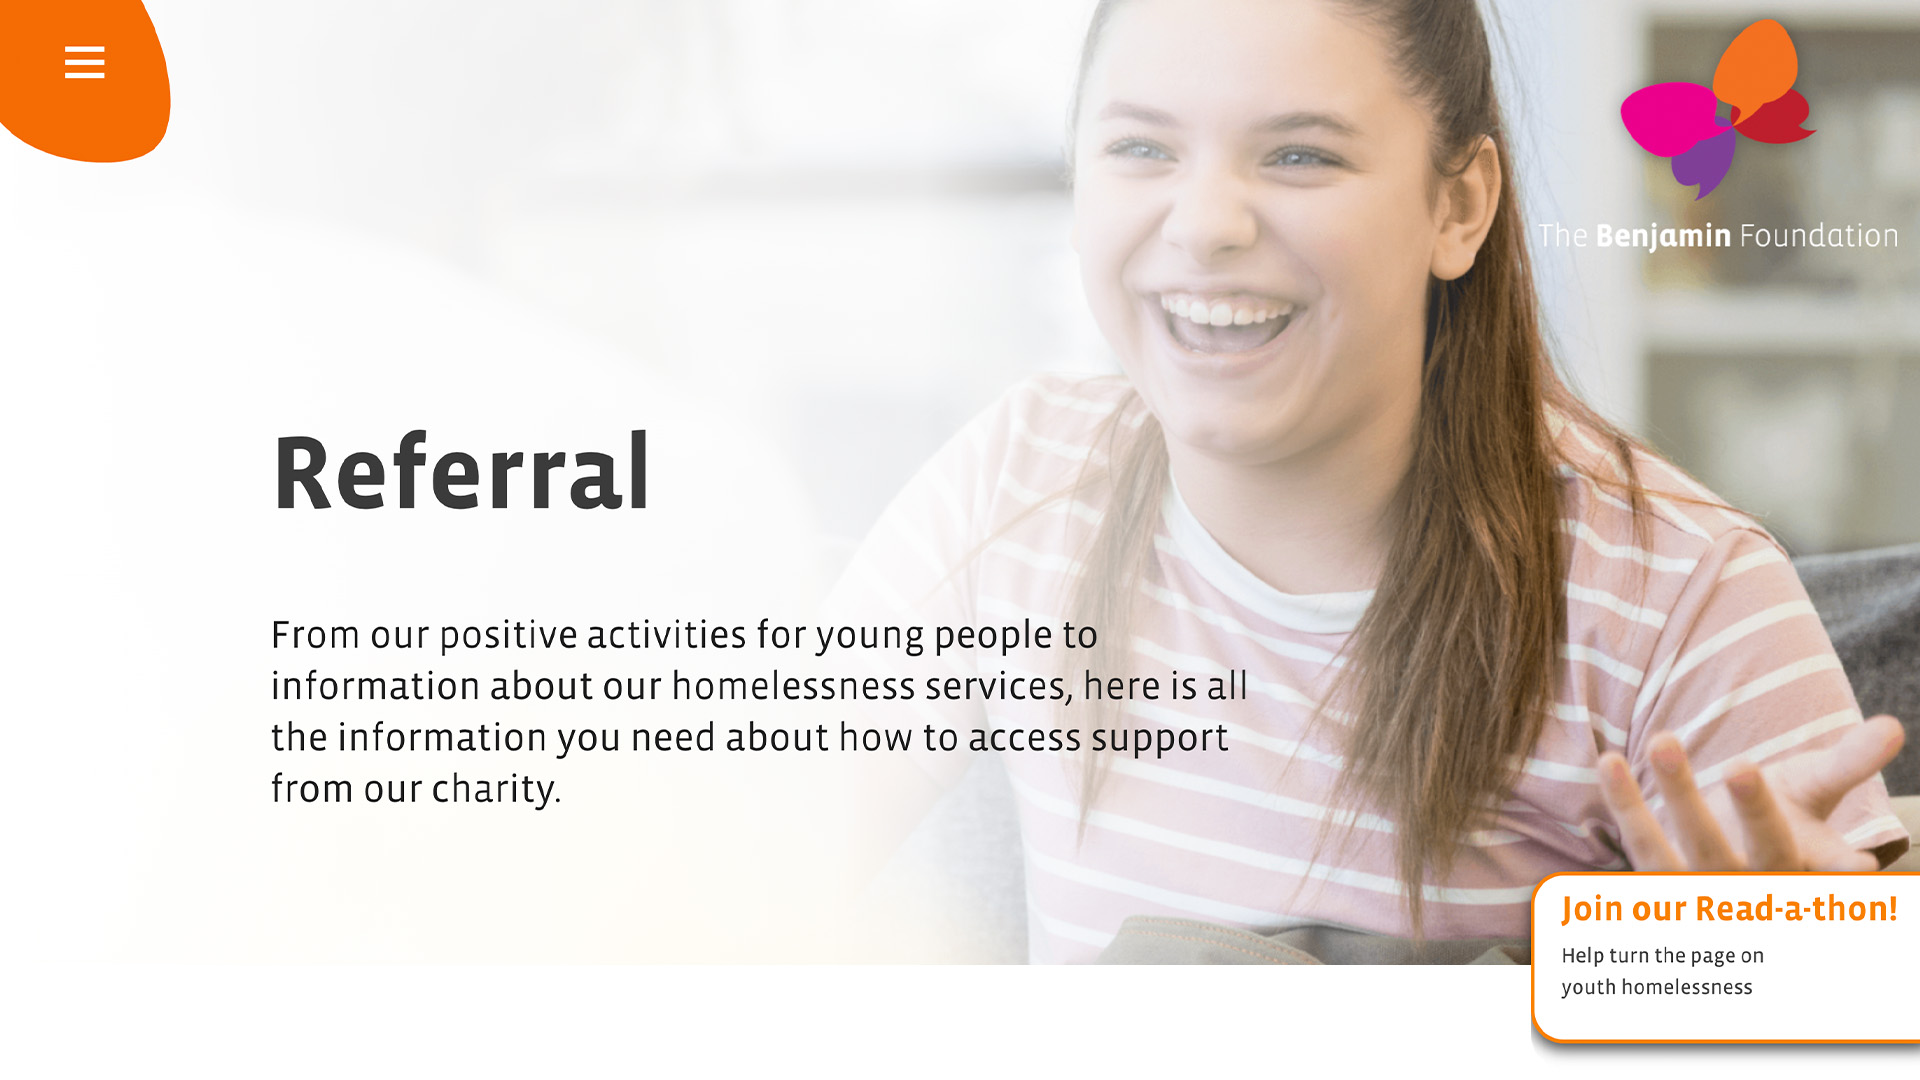 The Benjamin Foundation referral page